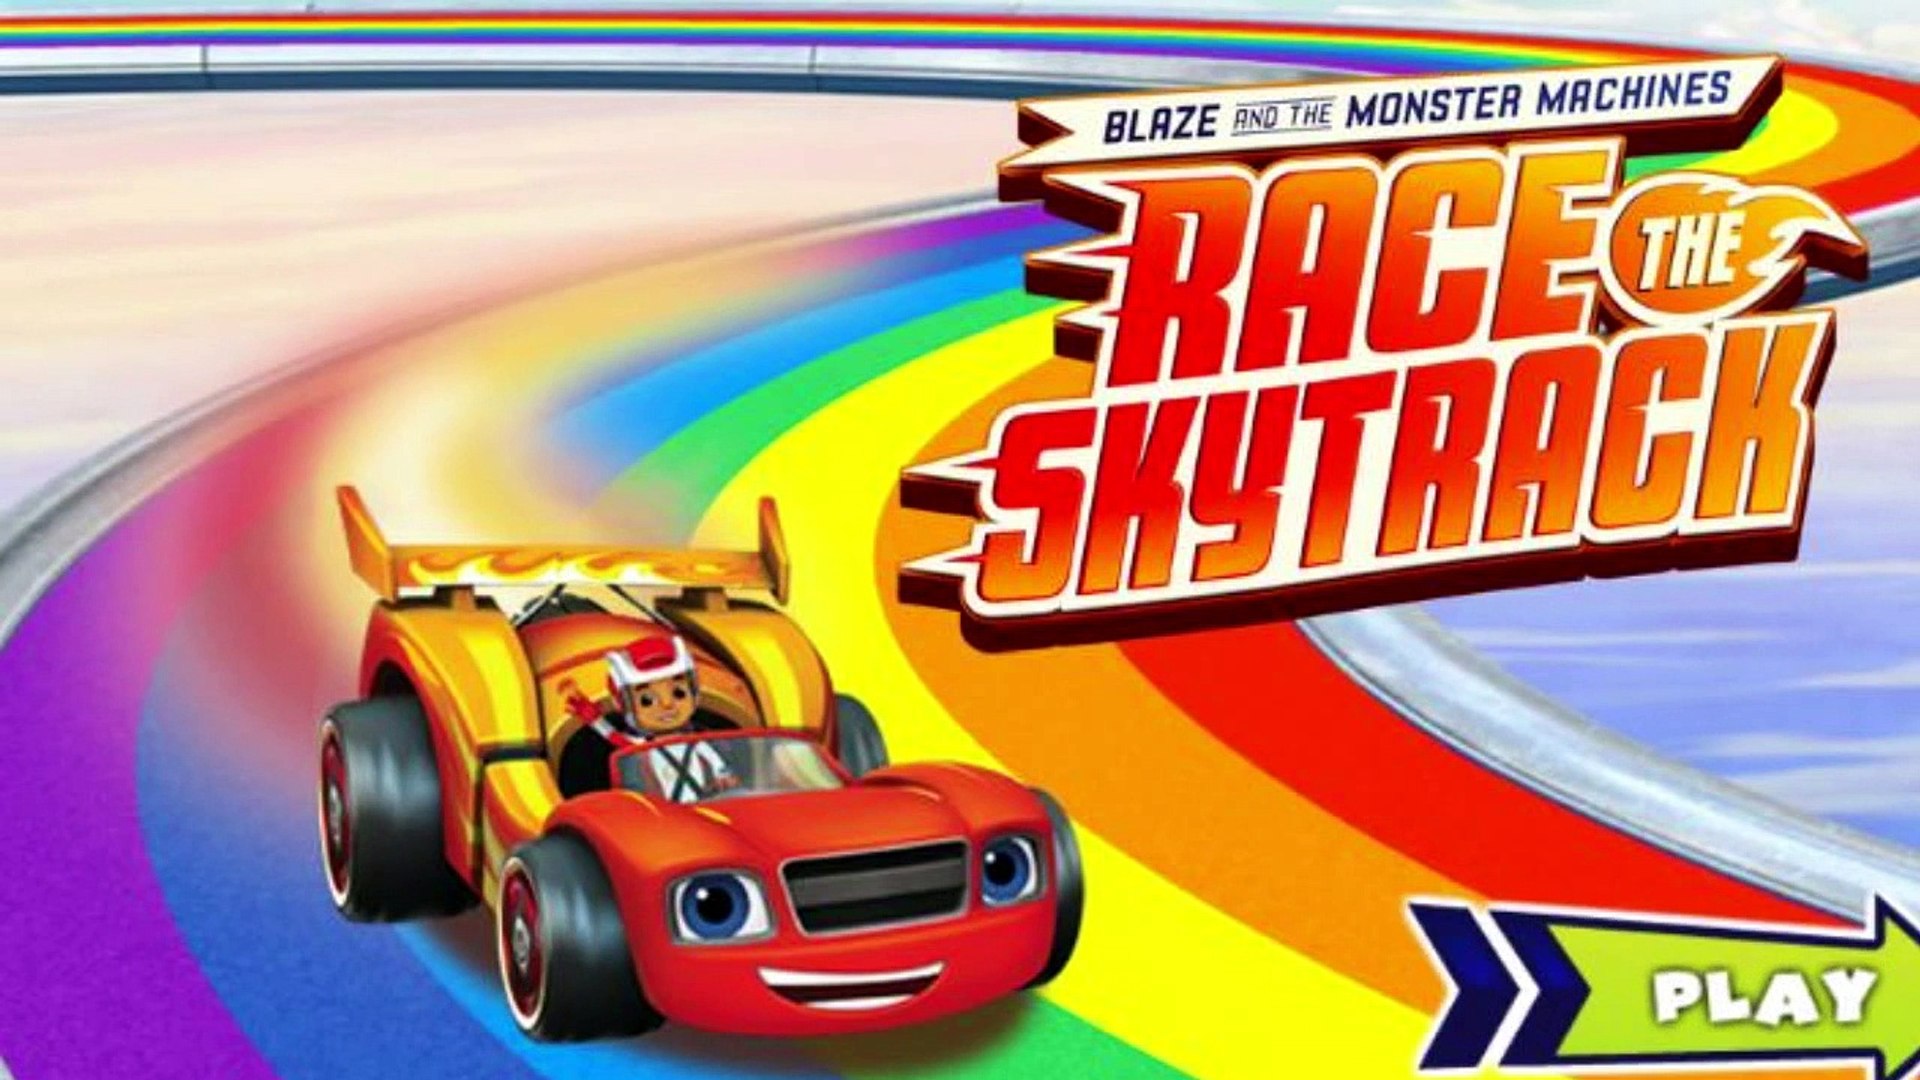 Blaze and The Monster Machines - Race the Skytrack - Nick Jr Games ...